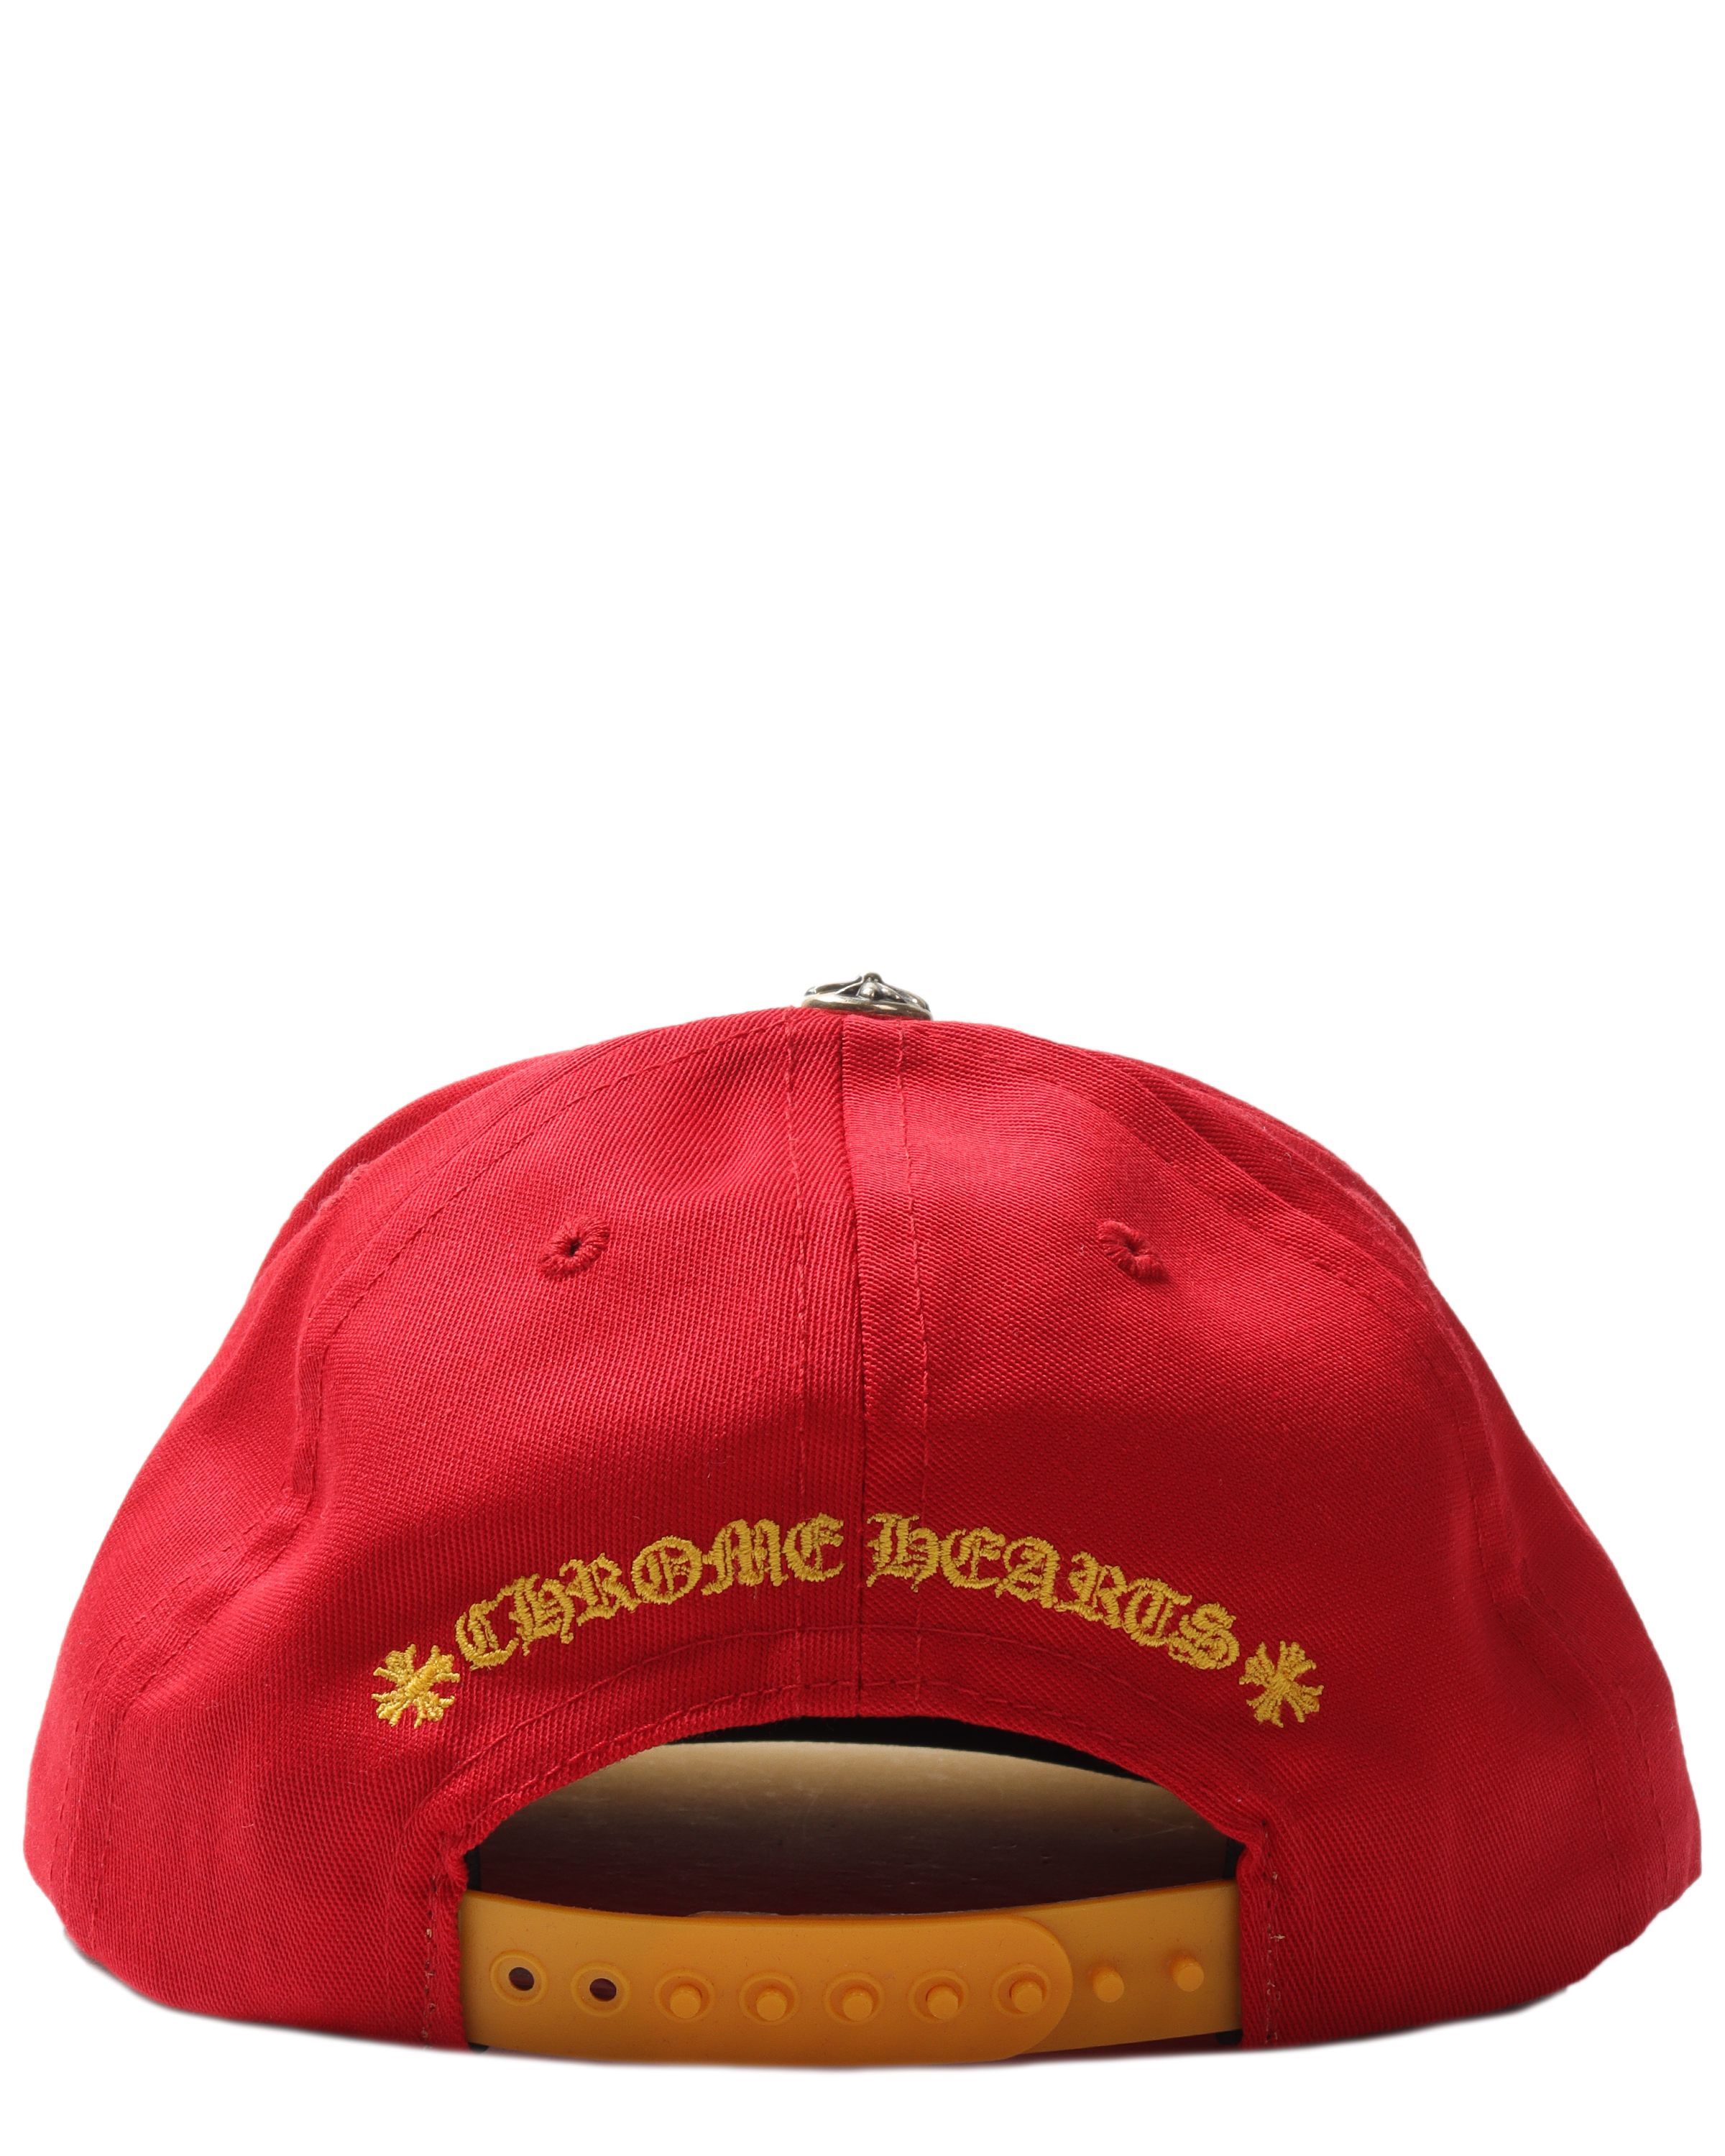 Red CH ButtonBaseball Hat